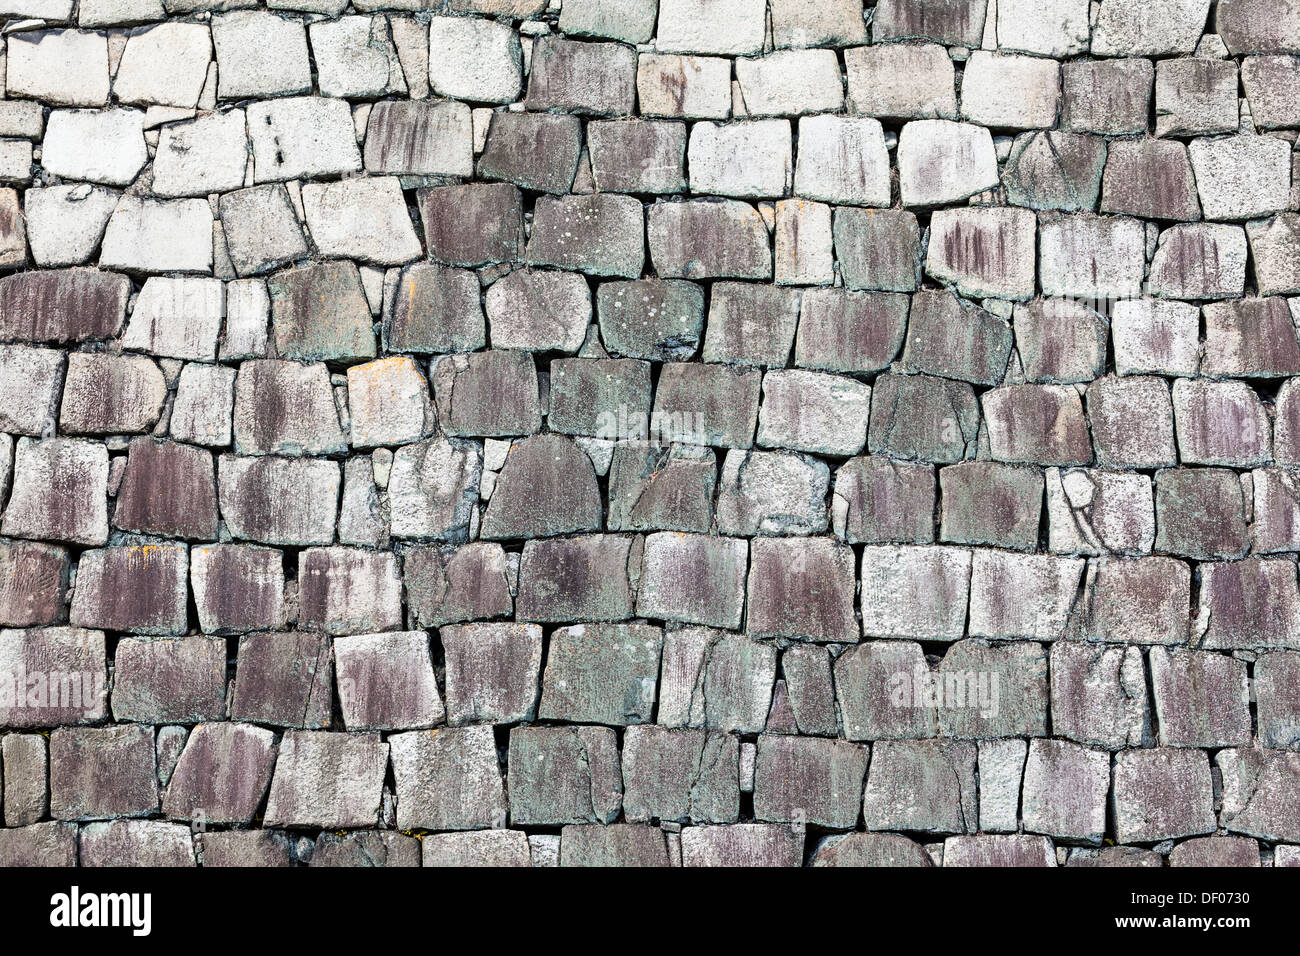 Stone wall of a traditional Japanese castle. Stock Photo